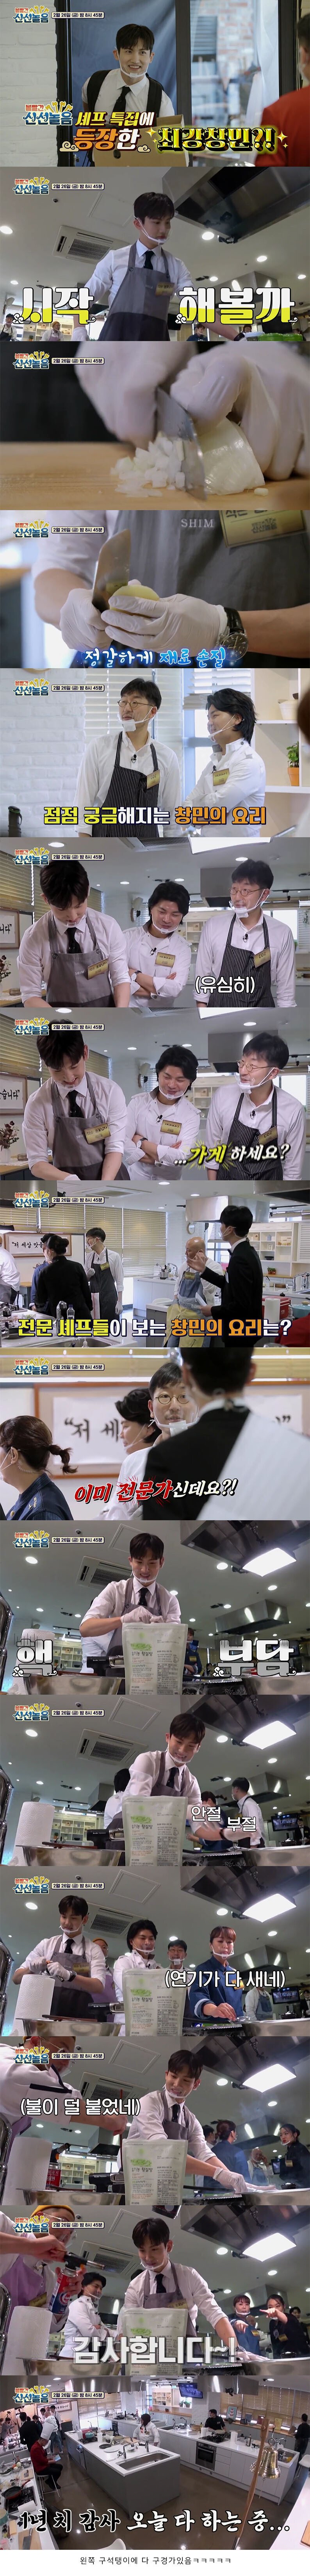 Max Changmin, who cooks in front of professional chefs.jpg